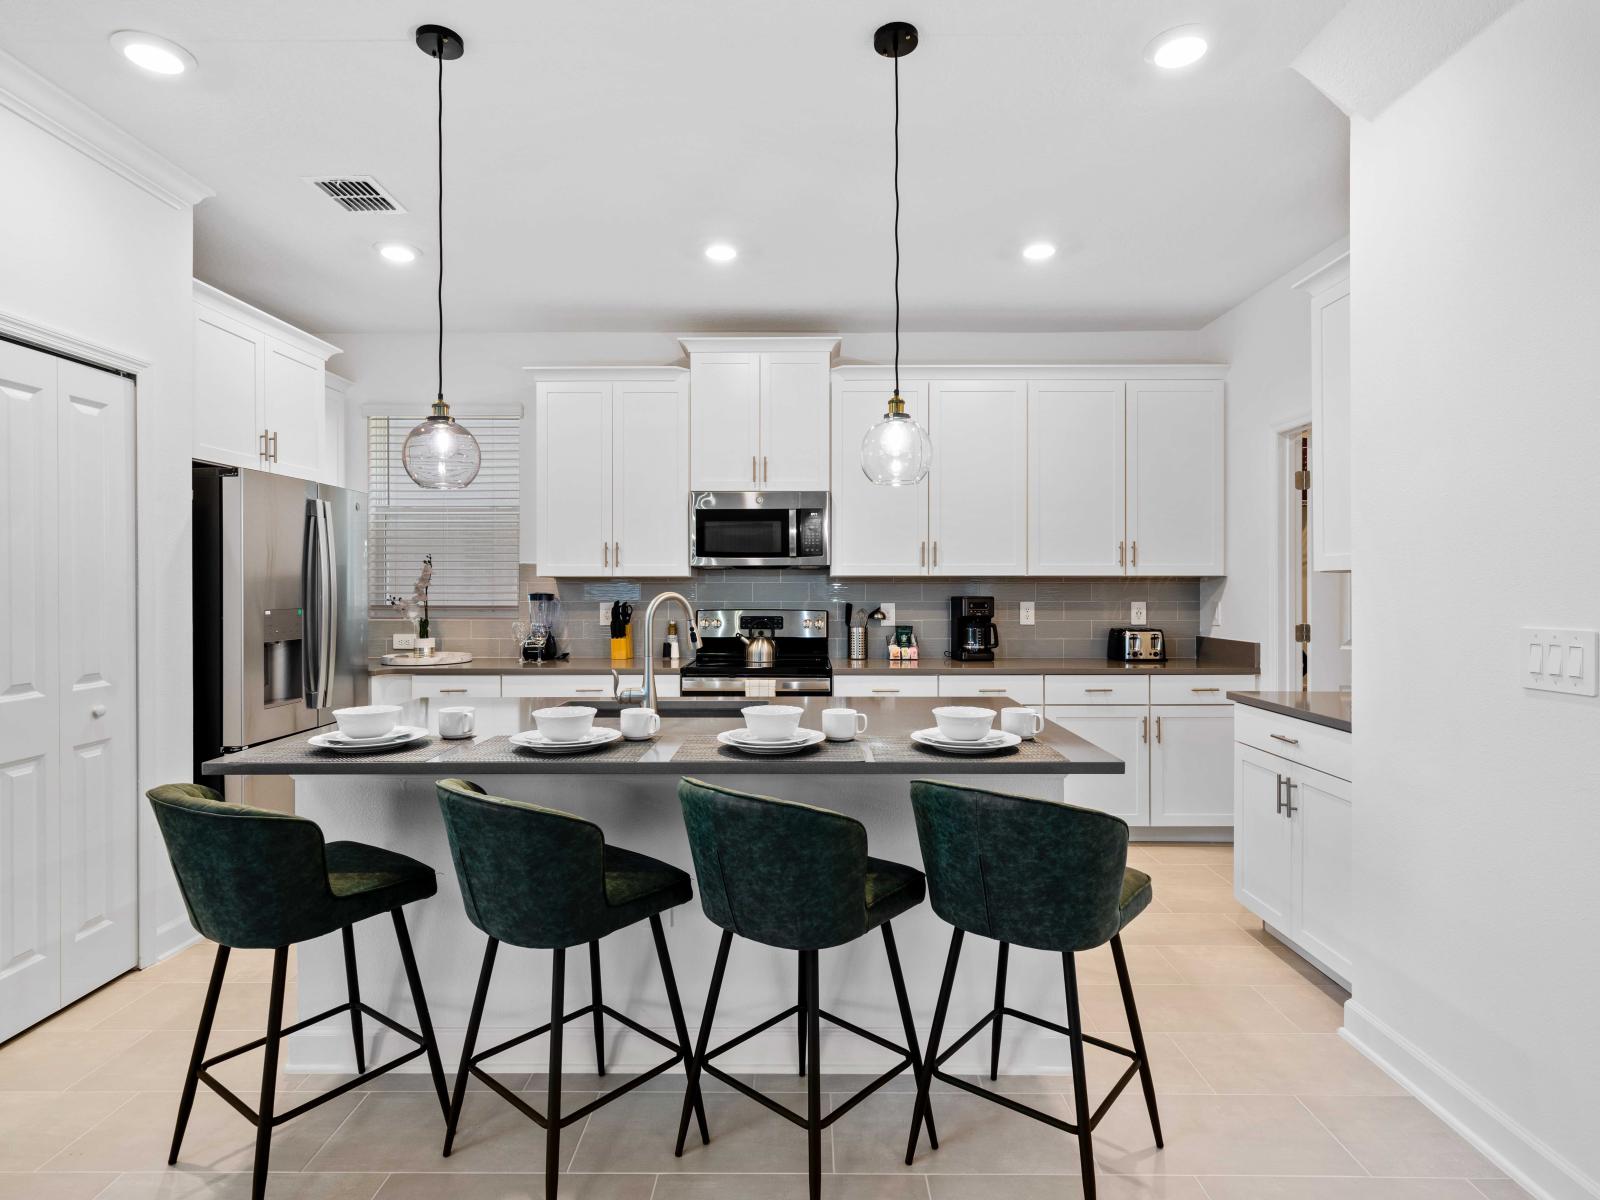 Roomy Kitchen of the Home in Davenport Florida - Stainless Steel Appliances - Availability of all kitchen accessories - Elegant lighting - Sufficient space to walk and work according to your ease - High chairs and Breakfast bar